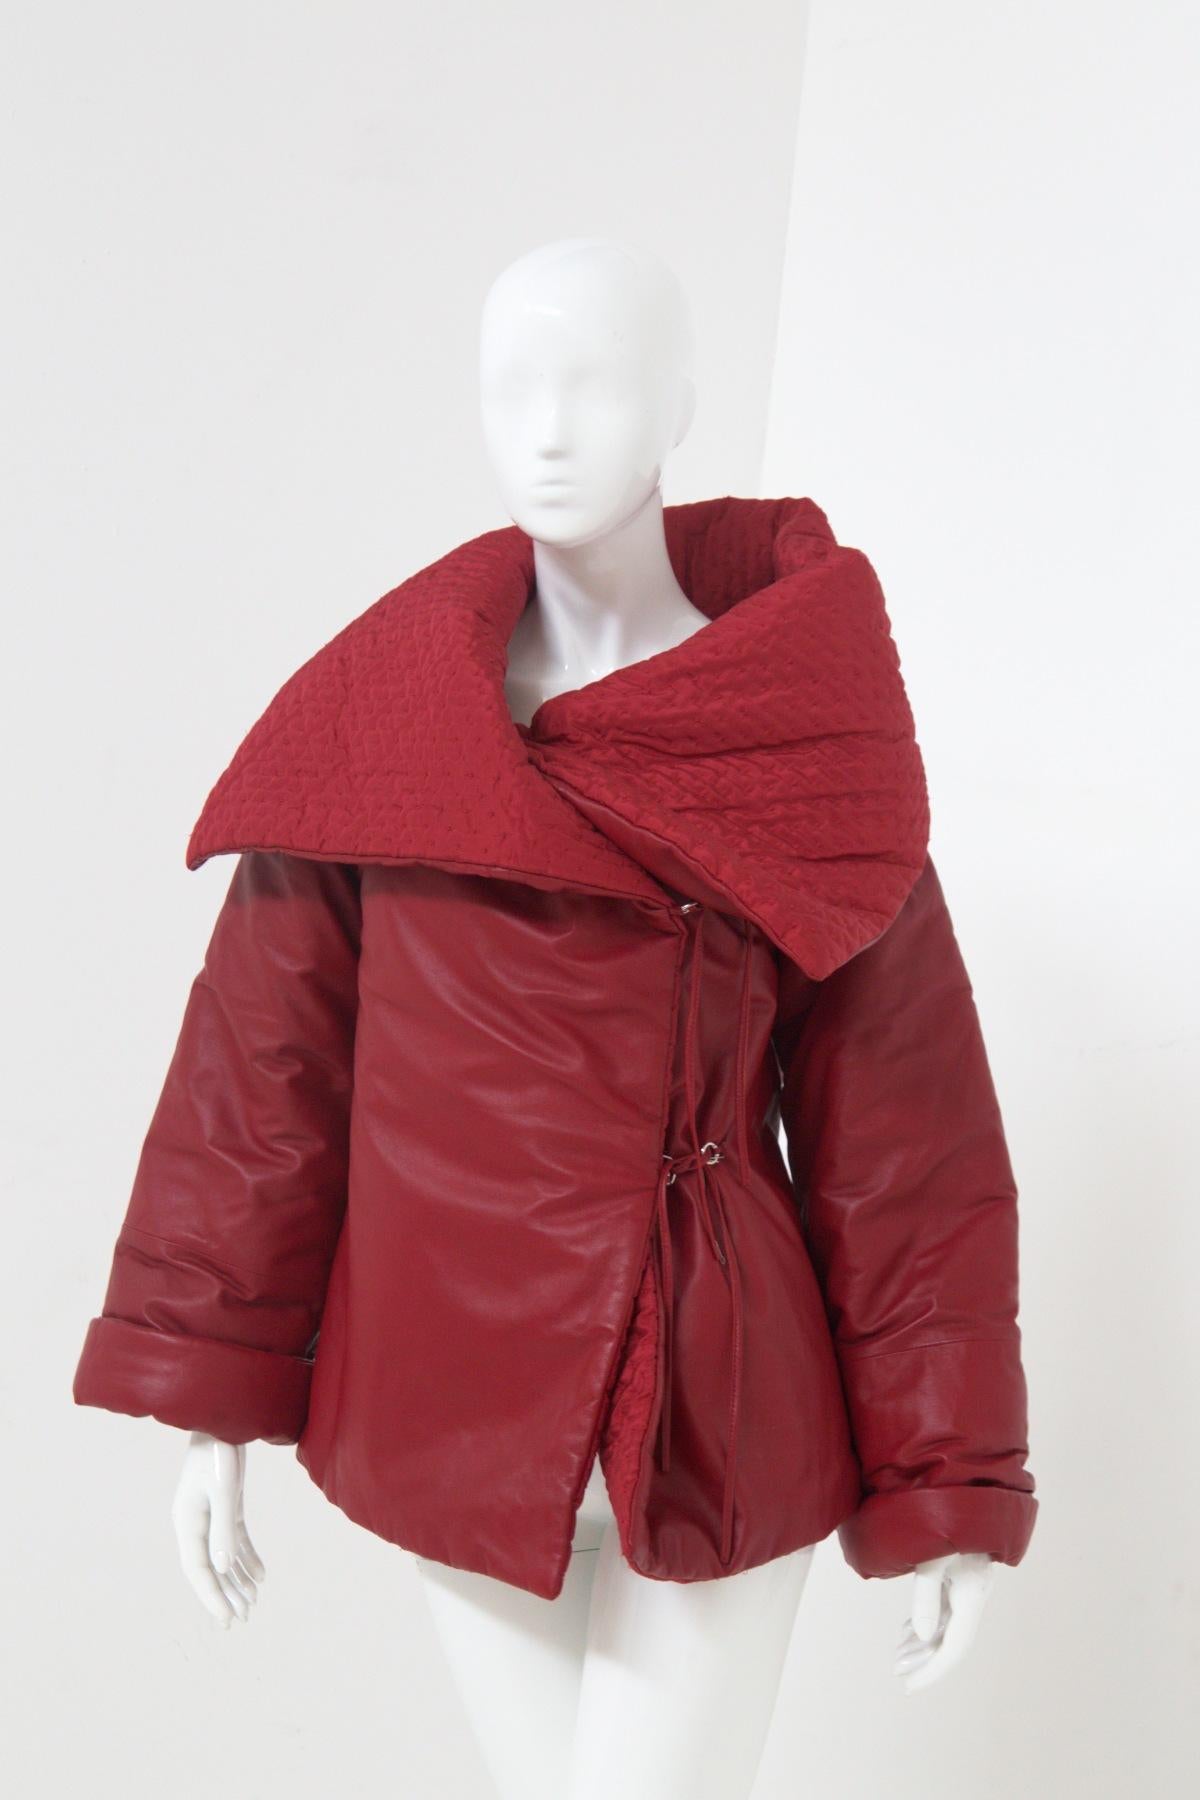 Gianfranco Ferré Rare Oversized Red Leather Jacket For Sale 5